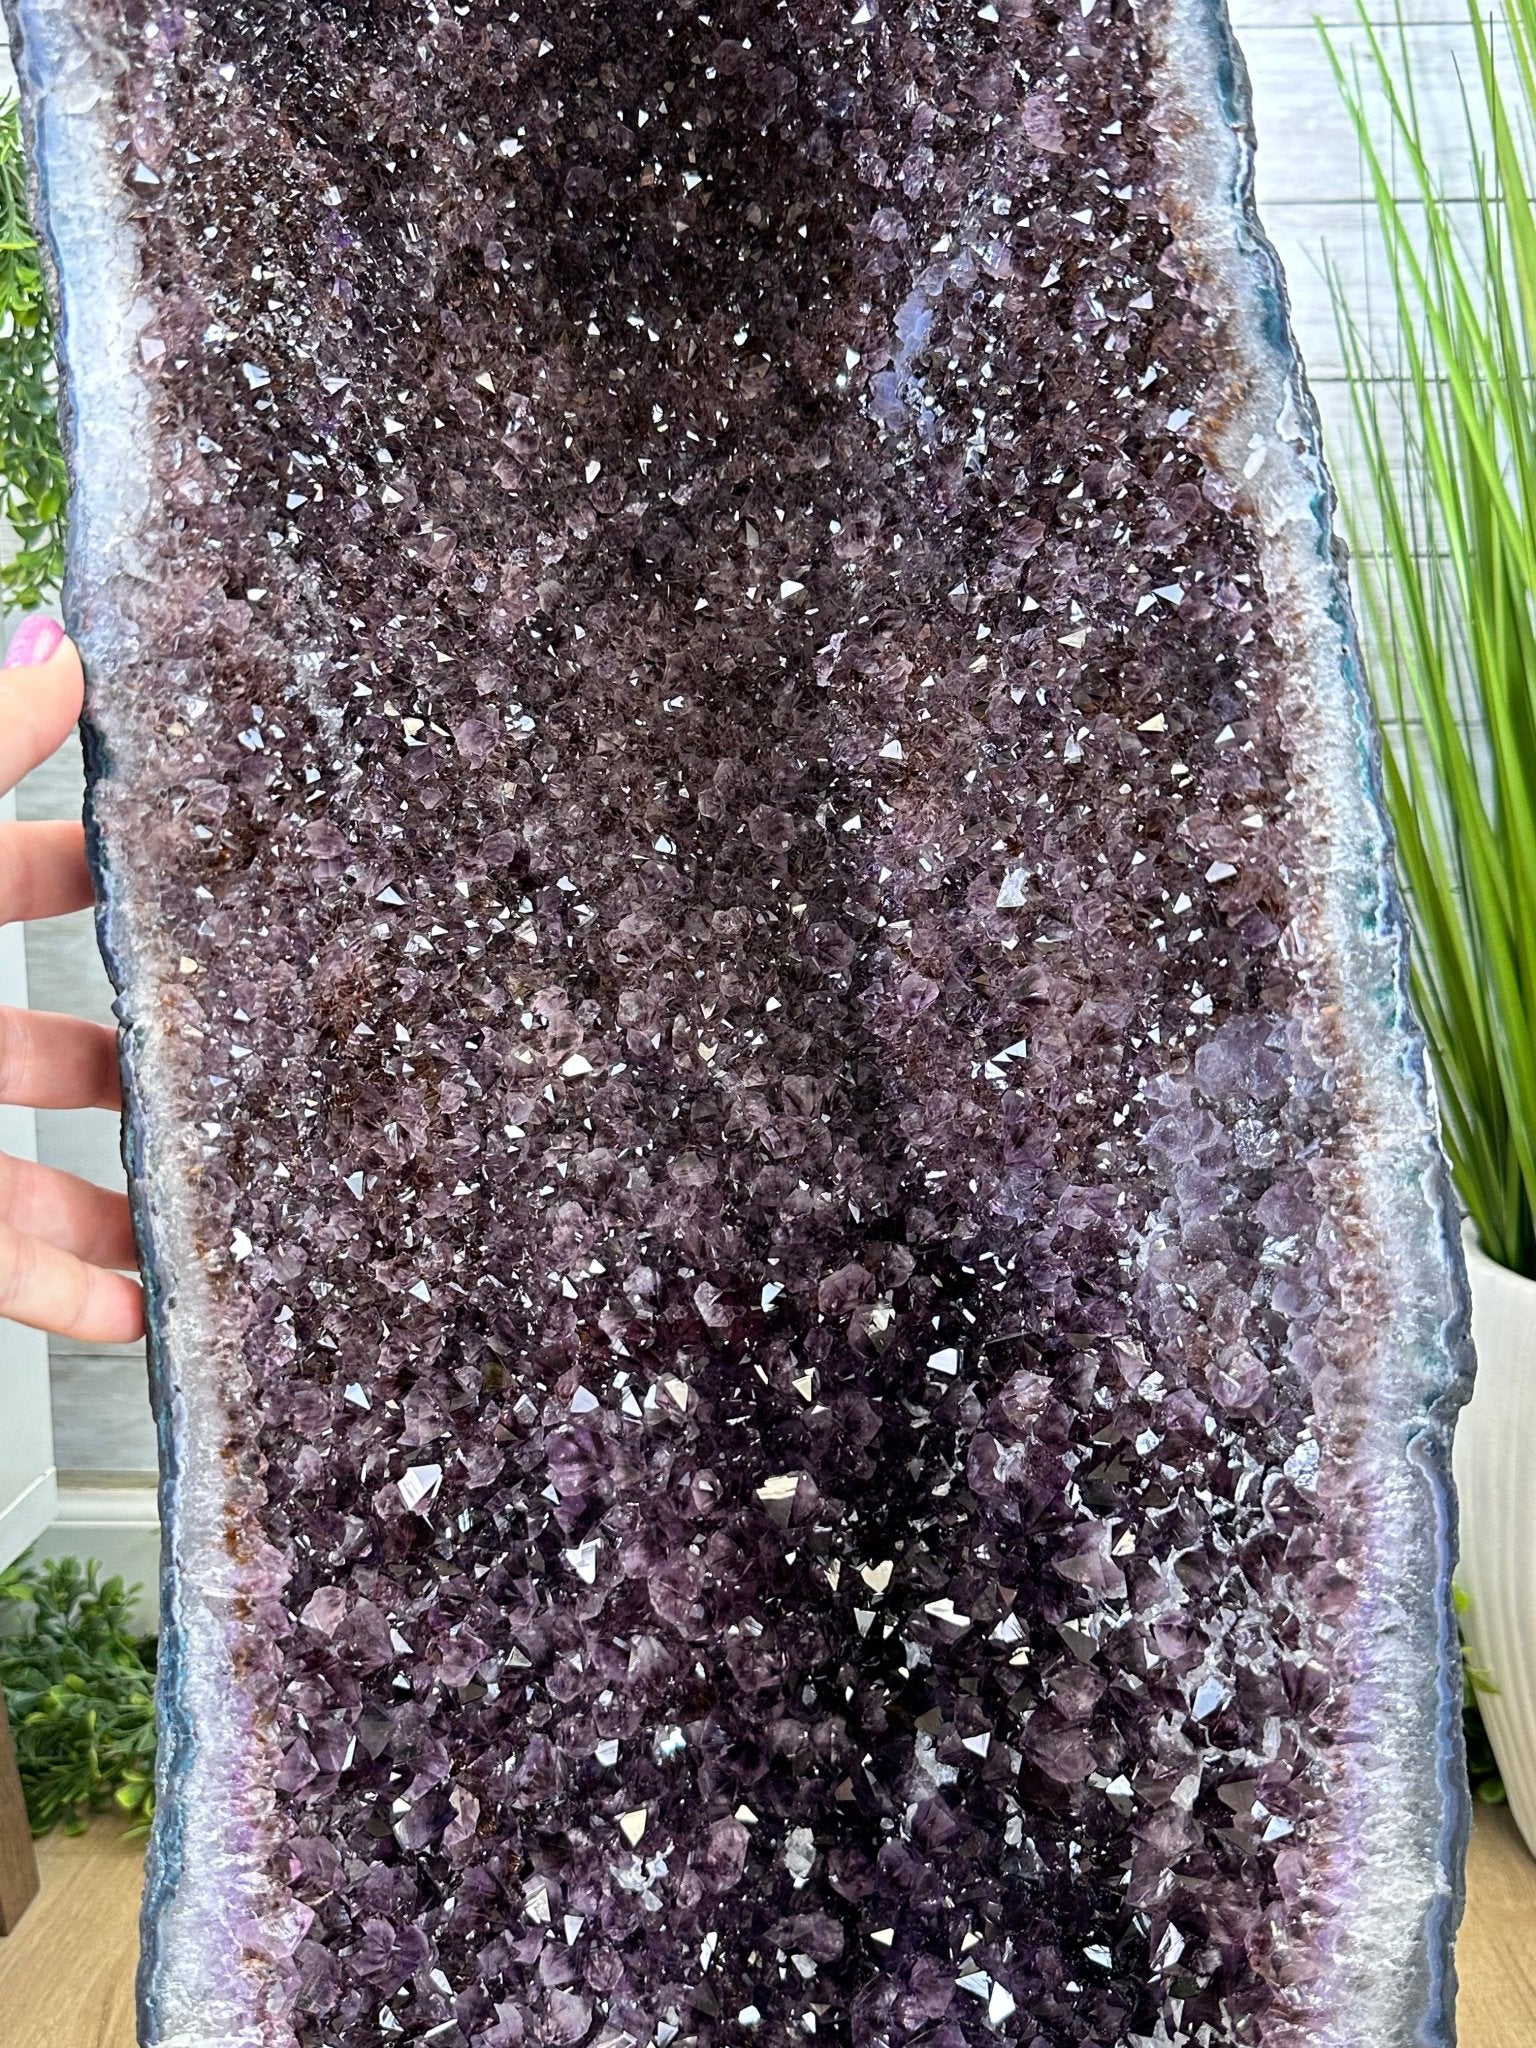 Extra Quality Amethyst Cathedral, 172 lbs & 34" Tall #5601-1273 - Brazil GemsBrazil GemsExtra Quality Amethyst Cathedral, 172 lbs & 34" Tall #5601-1273Cathedrals5601-1273